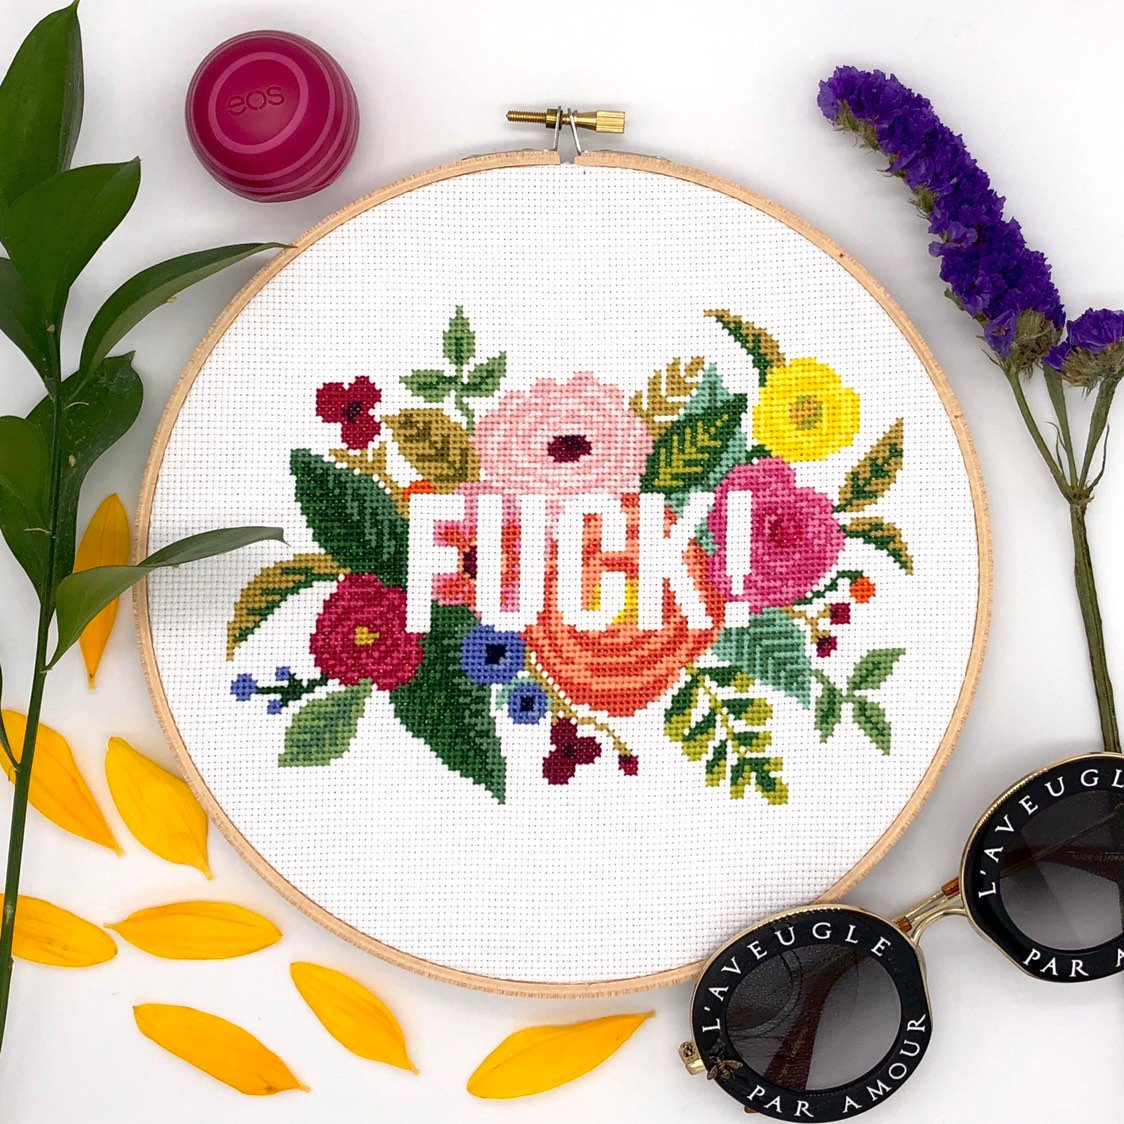 Excited to share the latest addition to my #etsy shop etsy.me/2T10SEw #crossstitch #crossstitchpattern #flowercrossstitch #moderncrossstitch #funnycrossstitch #fuckitcrossstitch #subversivecrosstitch #xstitch #вышивкакрестом